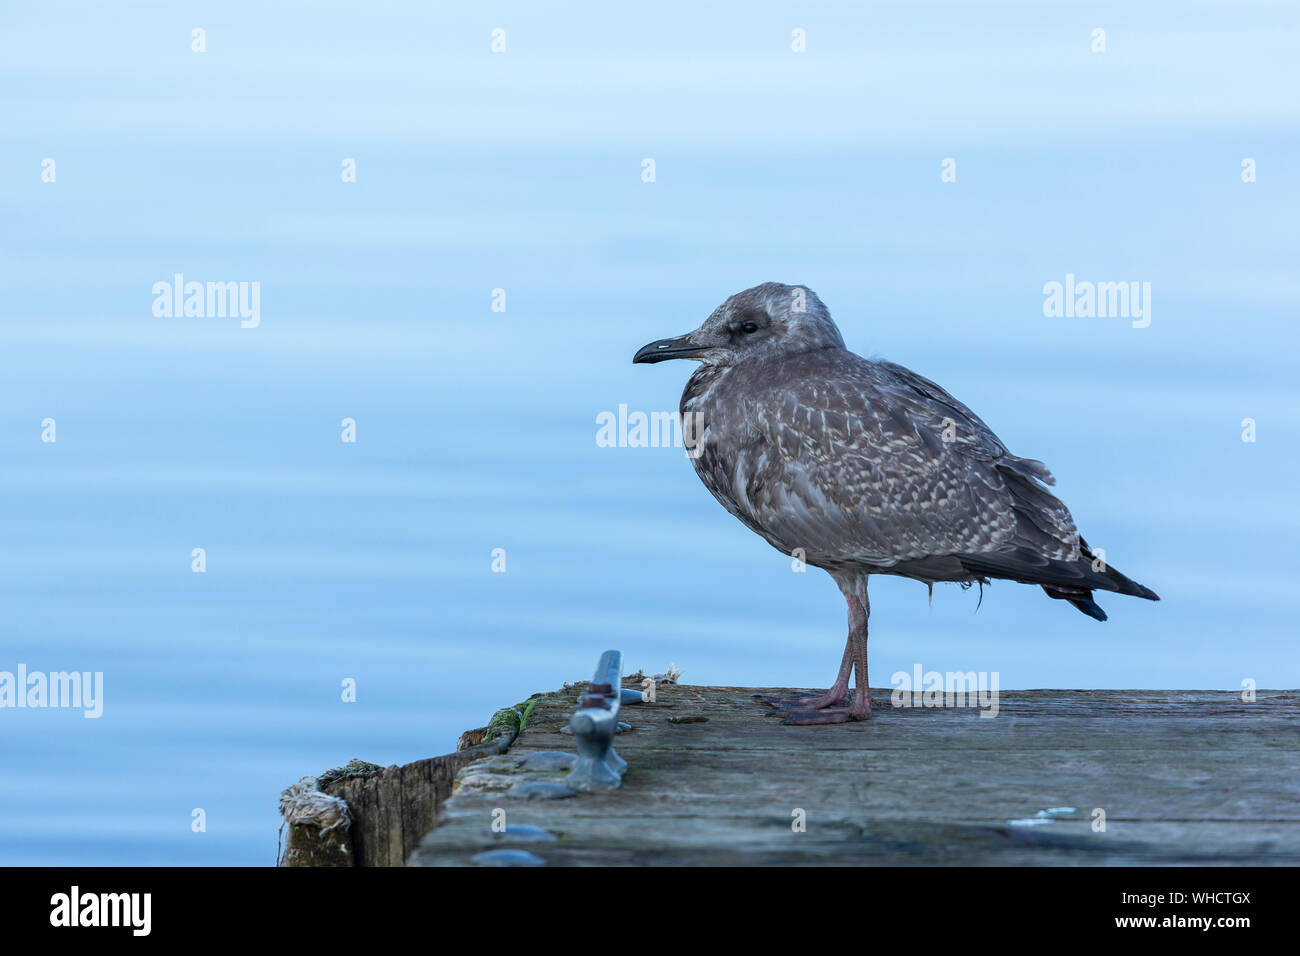 Young Seagull On A Dock Stock Photo